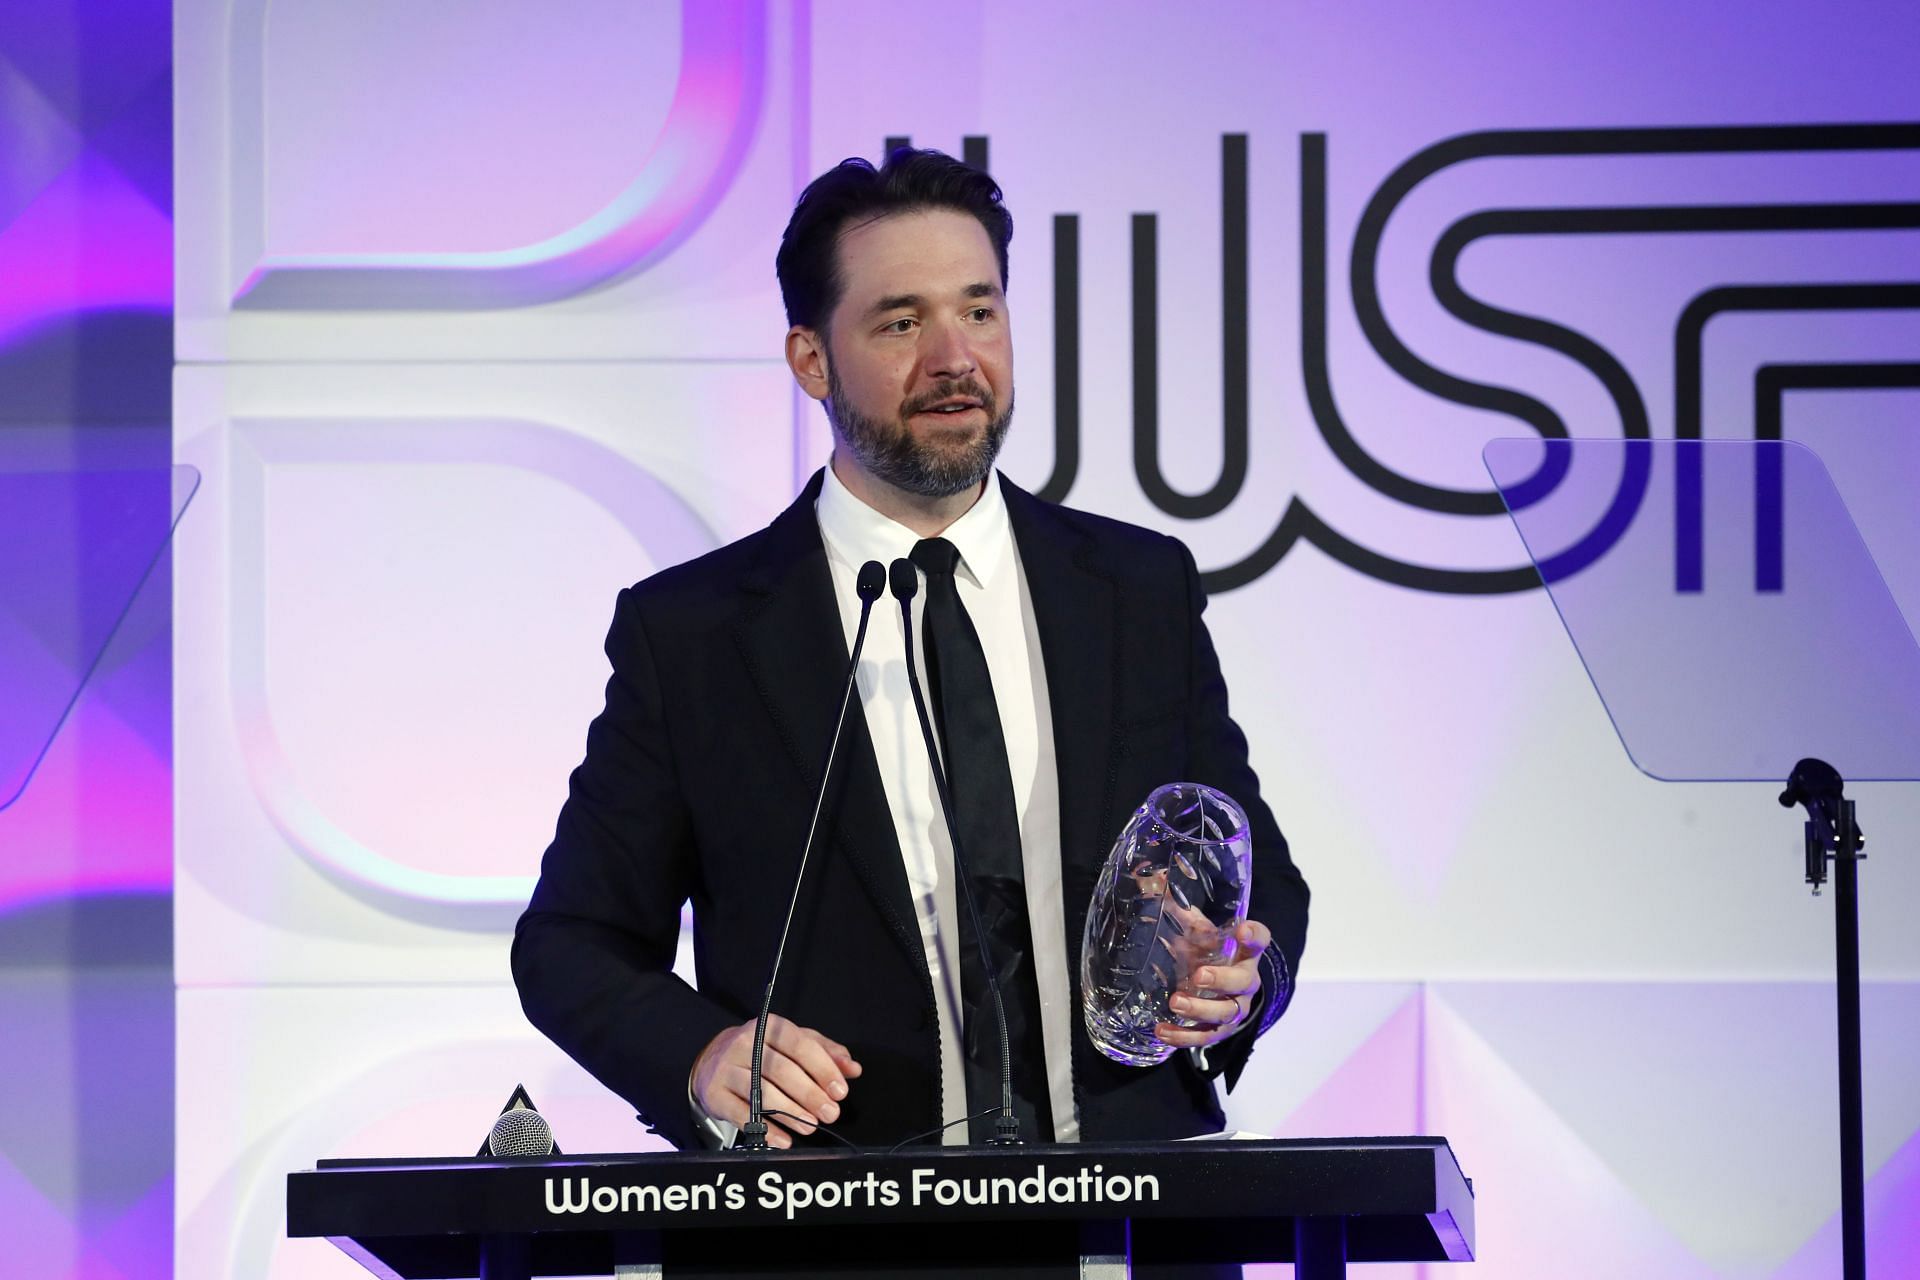 Serena Williams' husband Alexis Ohanian at the Women's Sports Foundation's Women In Sports Gala